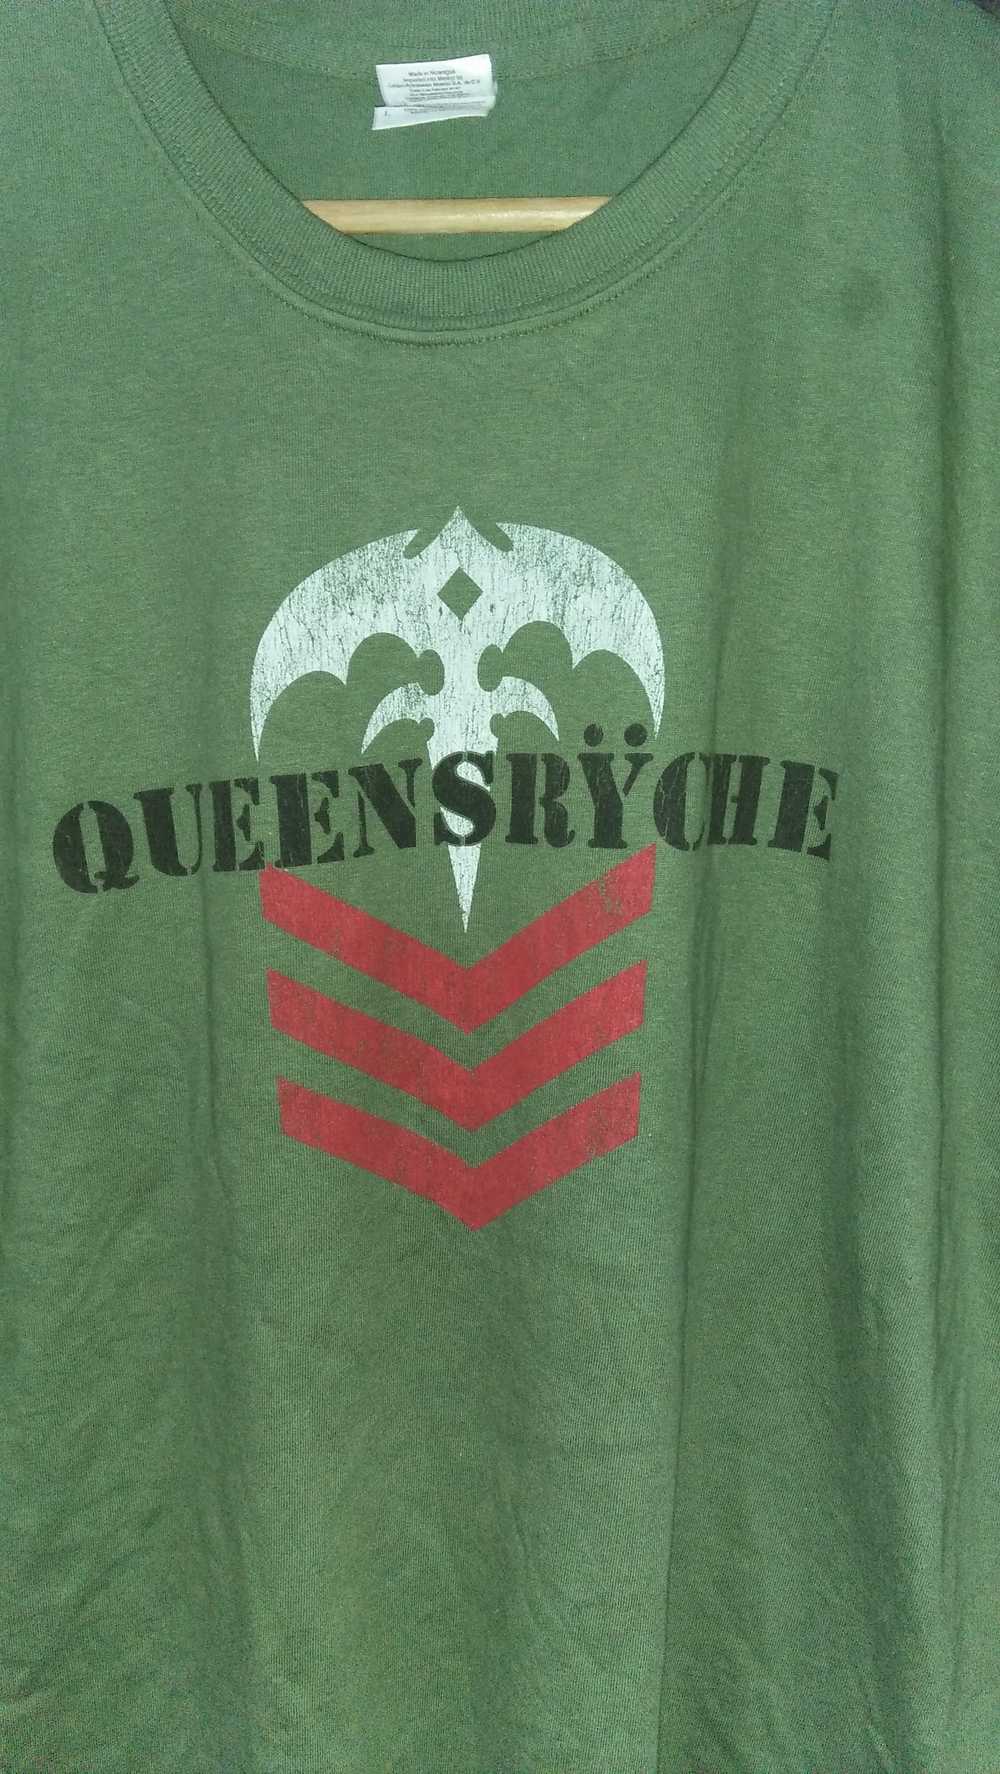 Band Tees × Rock T Shirt × Tour Tee Queensryche A… - image 3